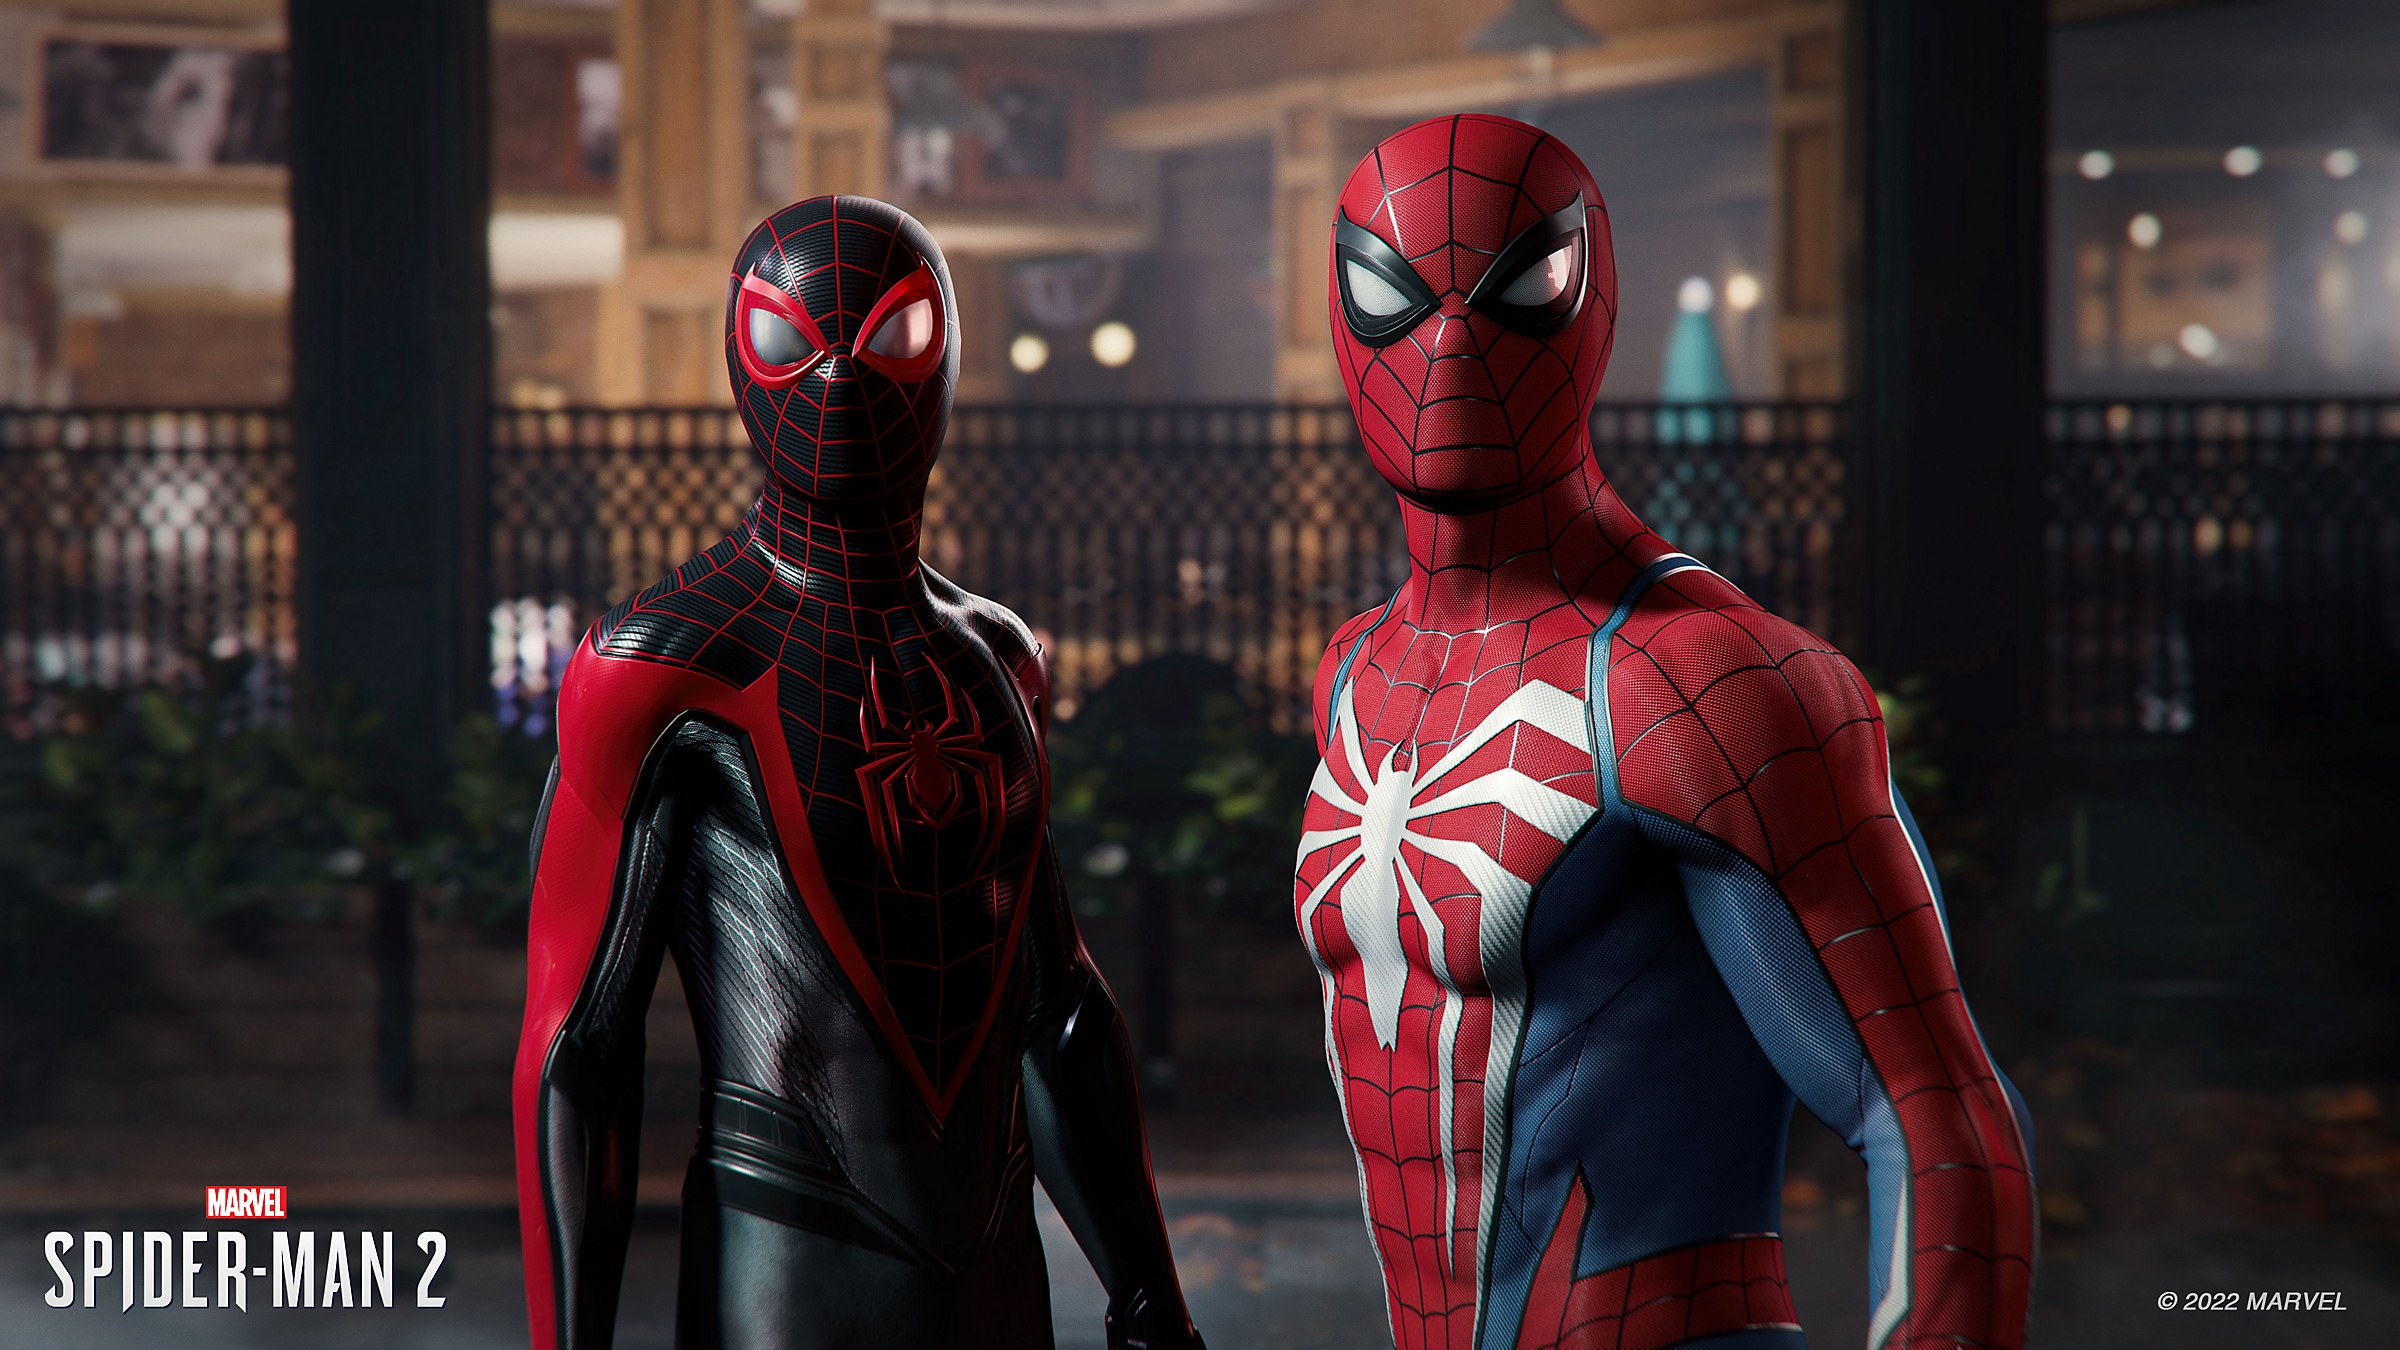 Image from Marvel's Spider-Man 2